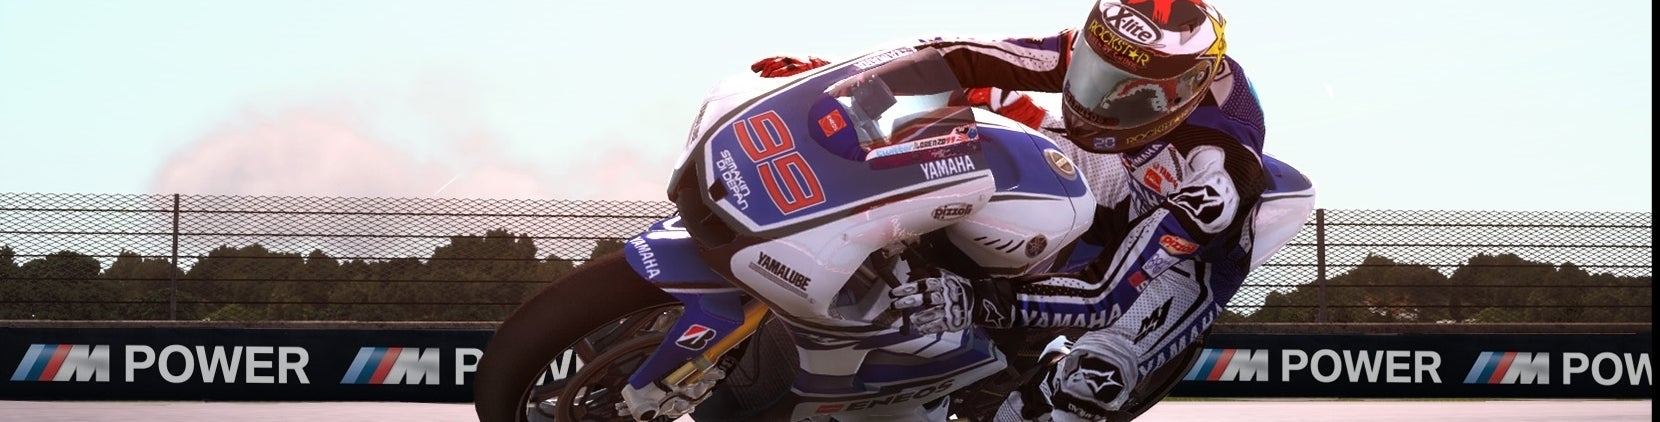 Image for MotoGP 13 review